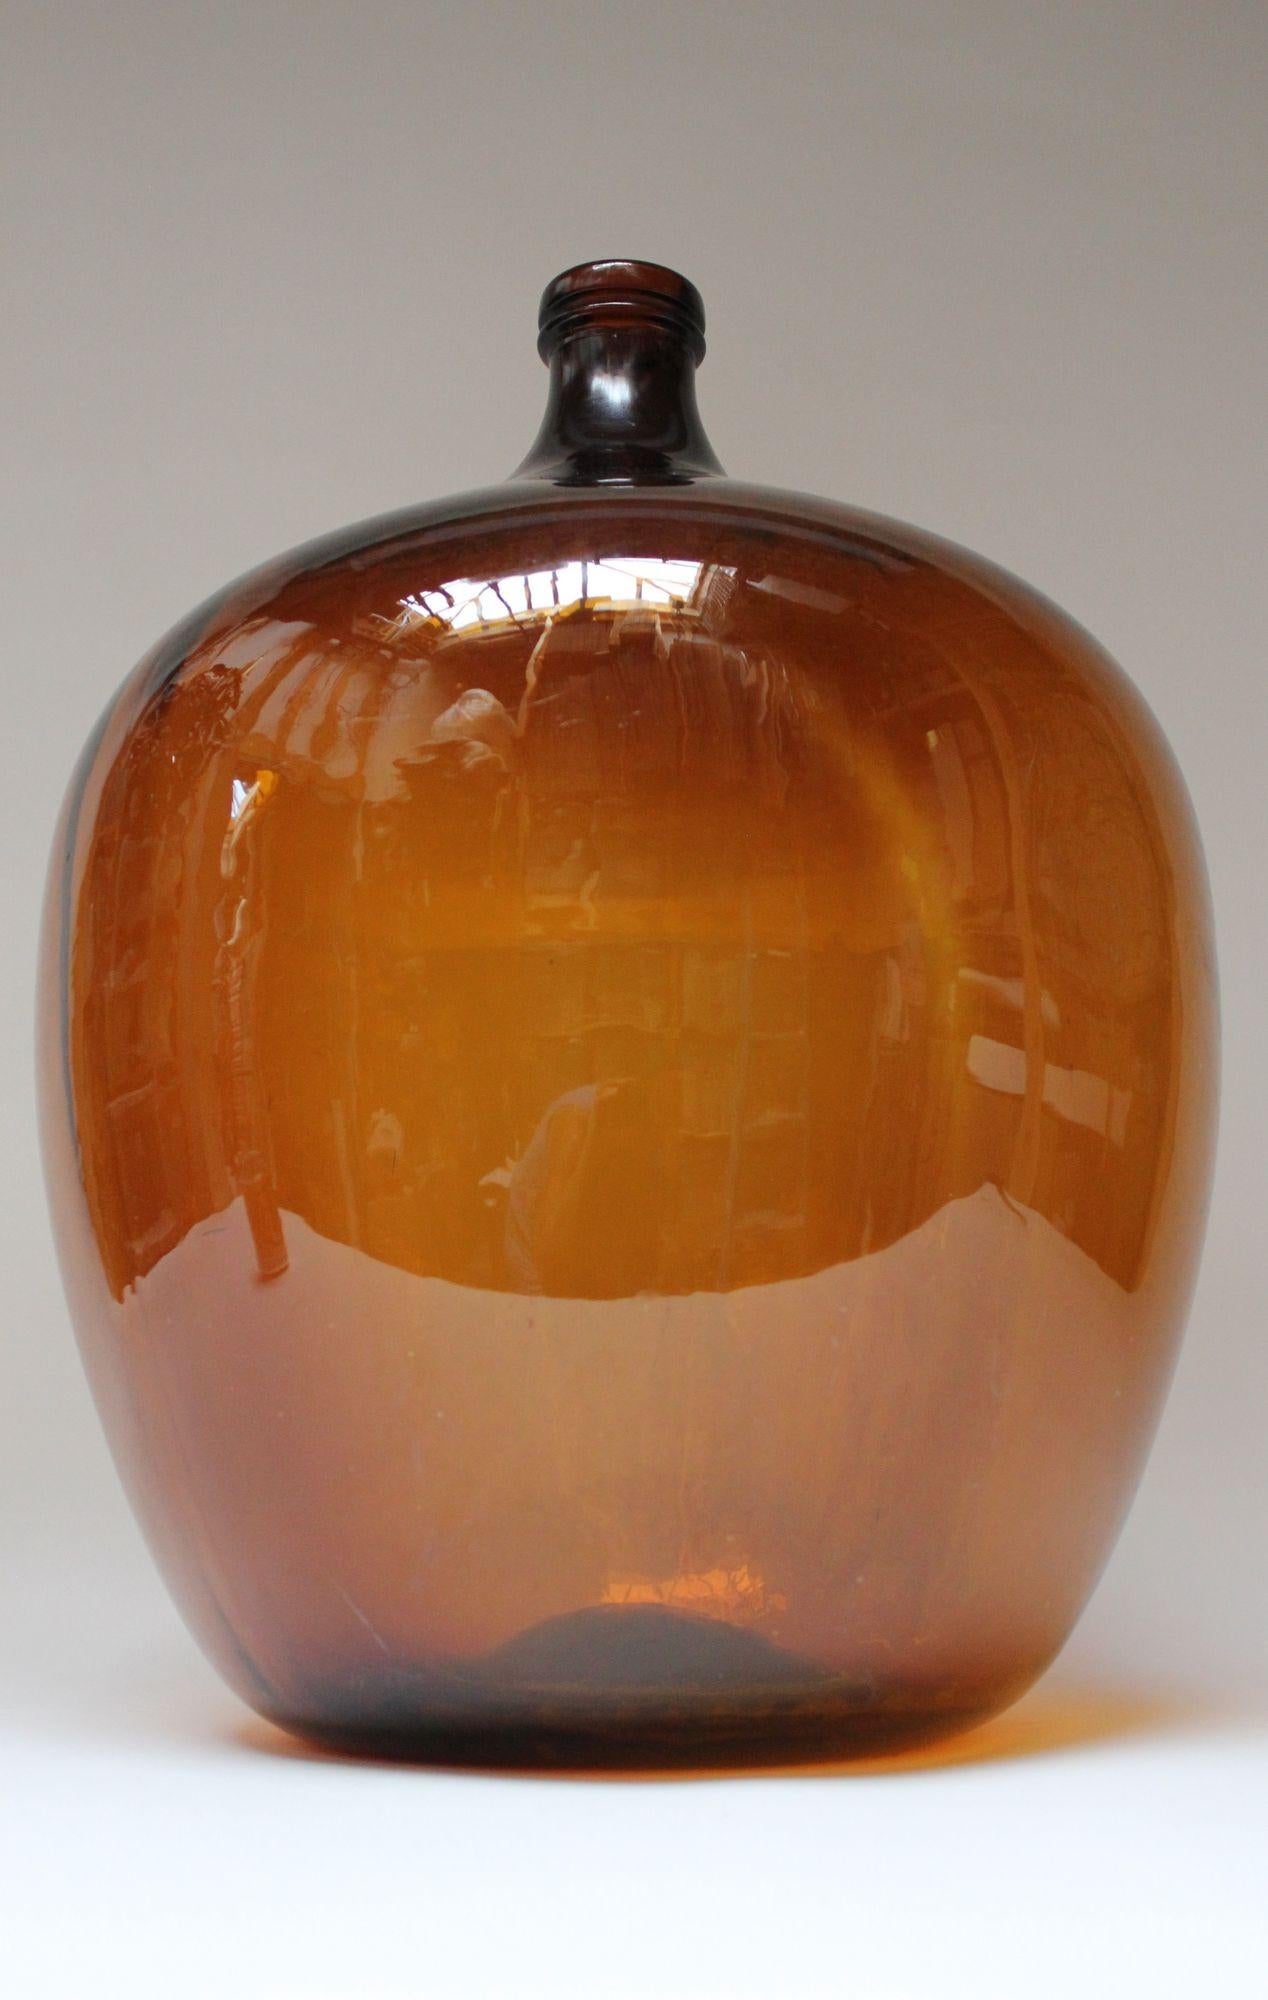 Impressive French Demijohn / Bonbonne Ambrée Brune originally used for transporting wine (ca. early 20th Century, France). Composed of 'blown-into-mold' amber glass exhibiting a smattering of bubbles within the glass itself. Unique color and